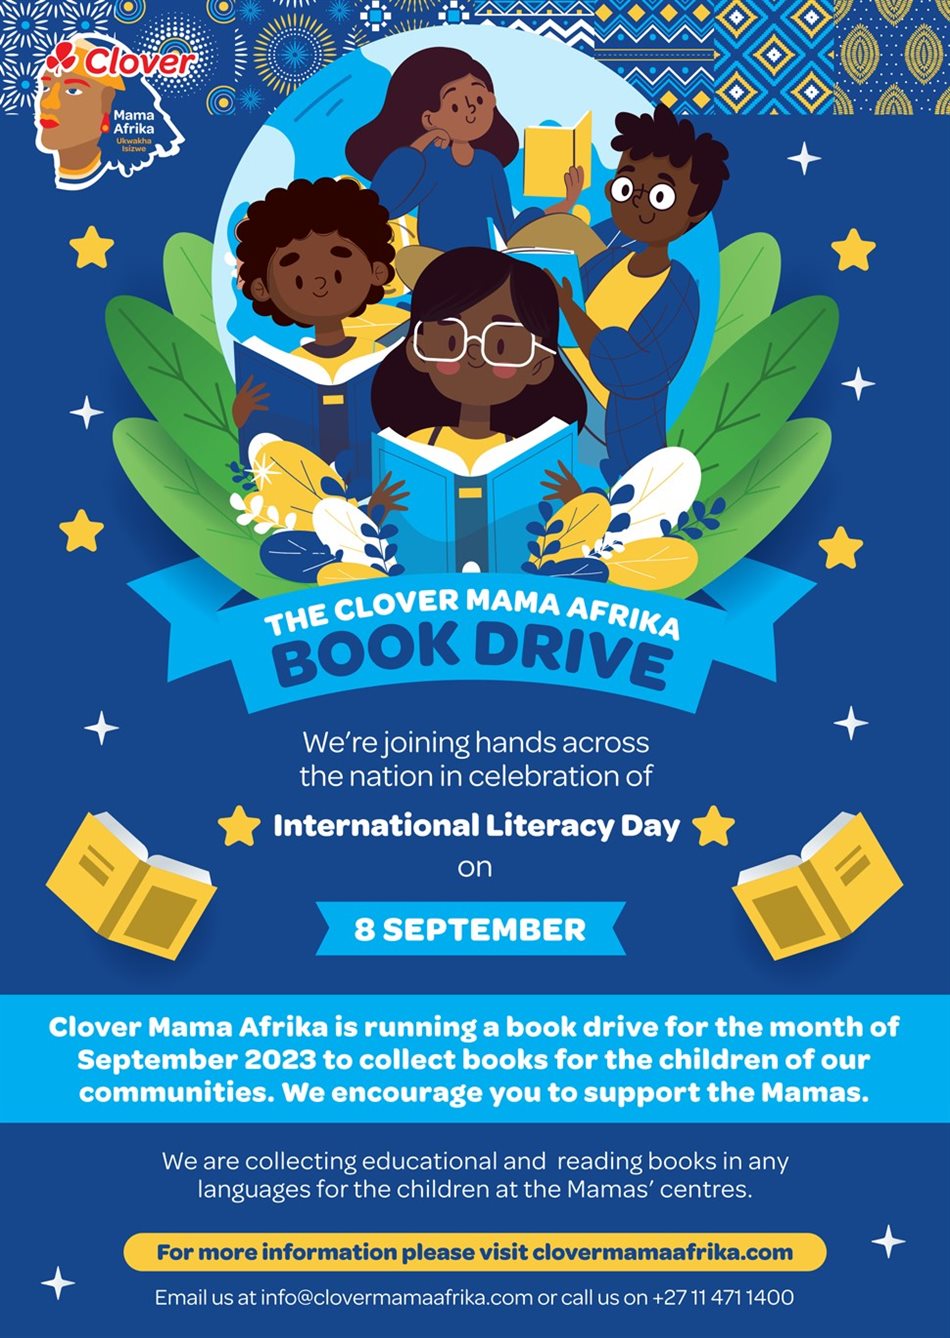 Help SAs children receive book donations in honour of Literacy Month